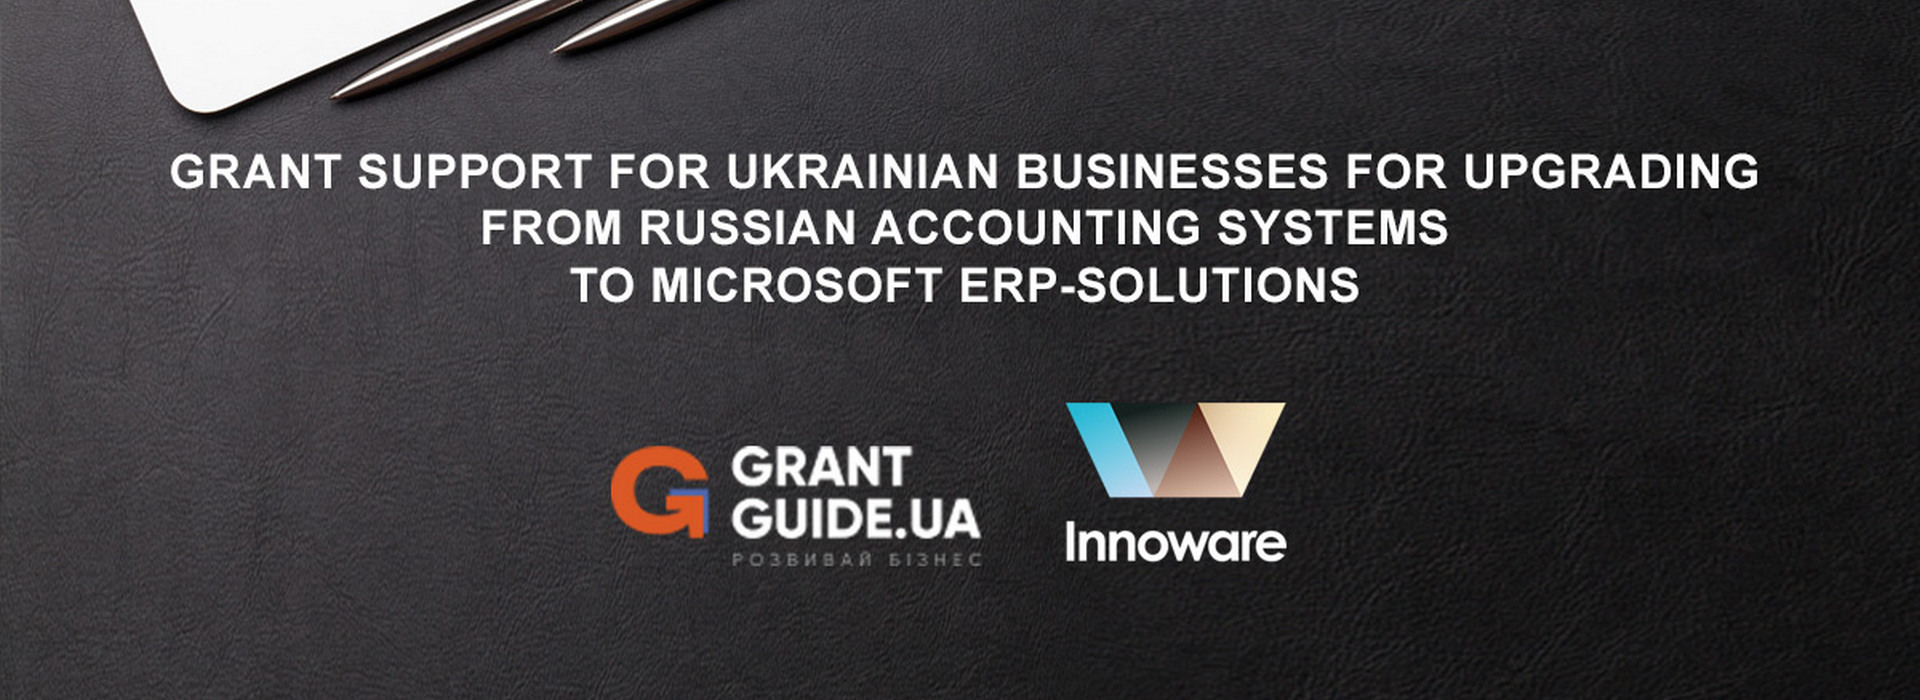 Grant Support for Ukrainian Businesses for Upgrading from russian Accounting Systems to Microsoft ERP-Solutions